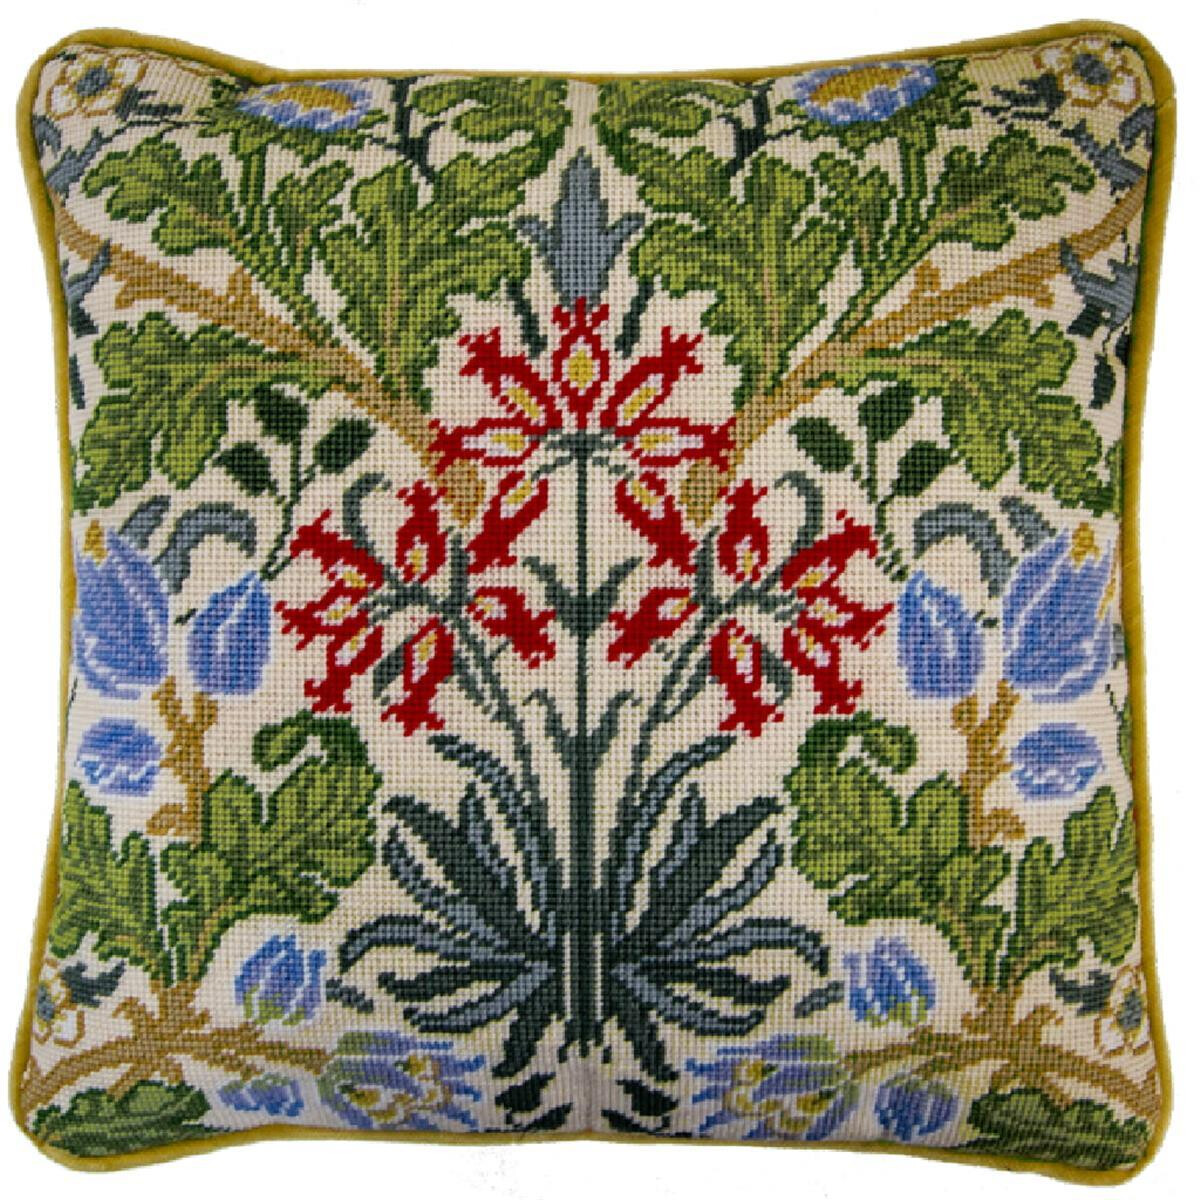 Square cushion with embroidered botanical design. The...